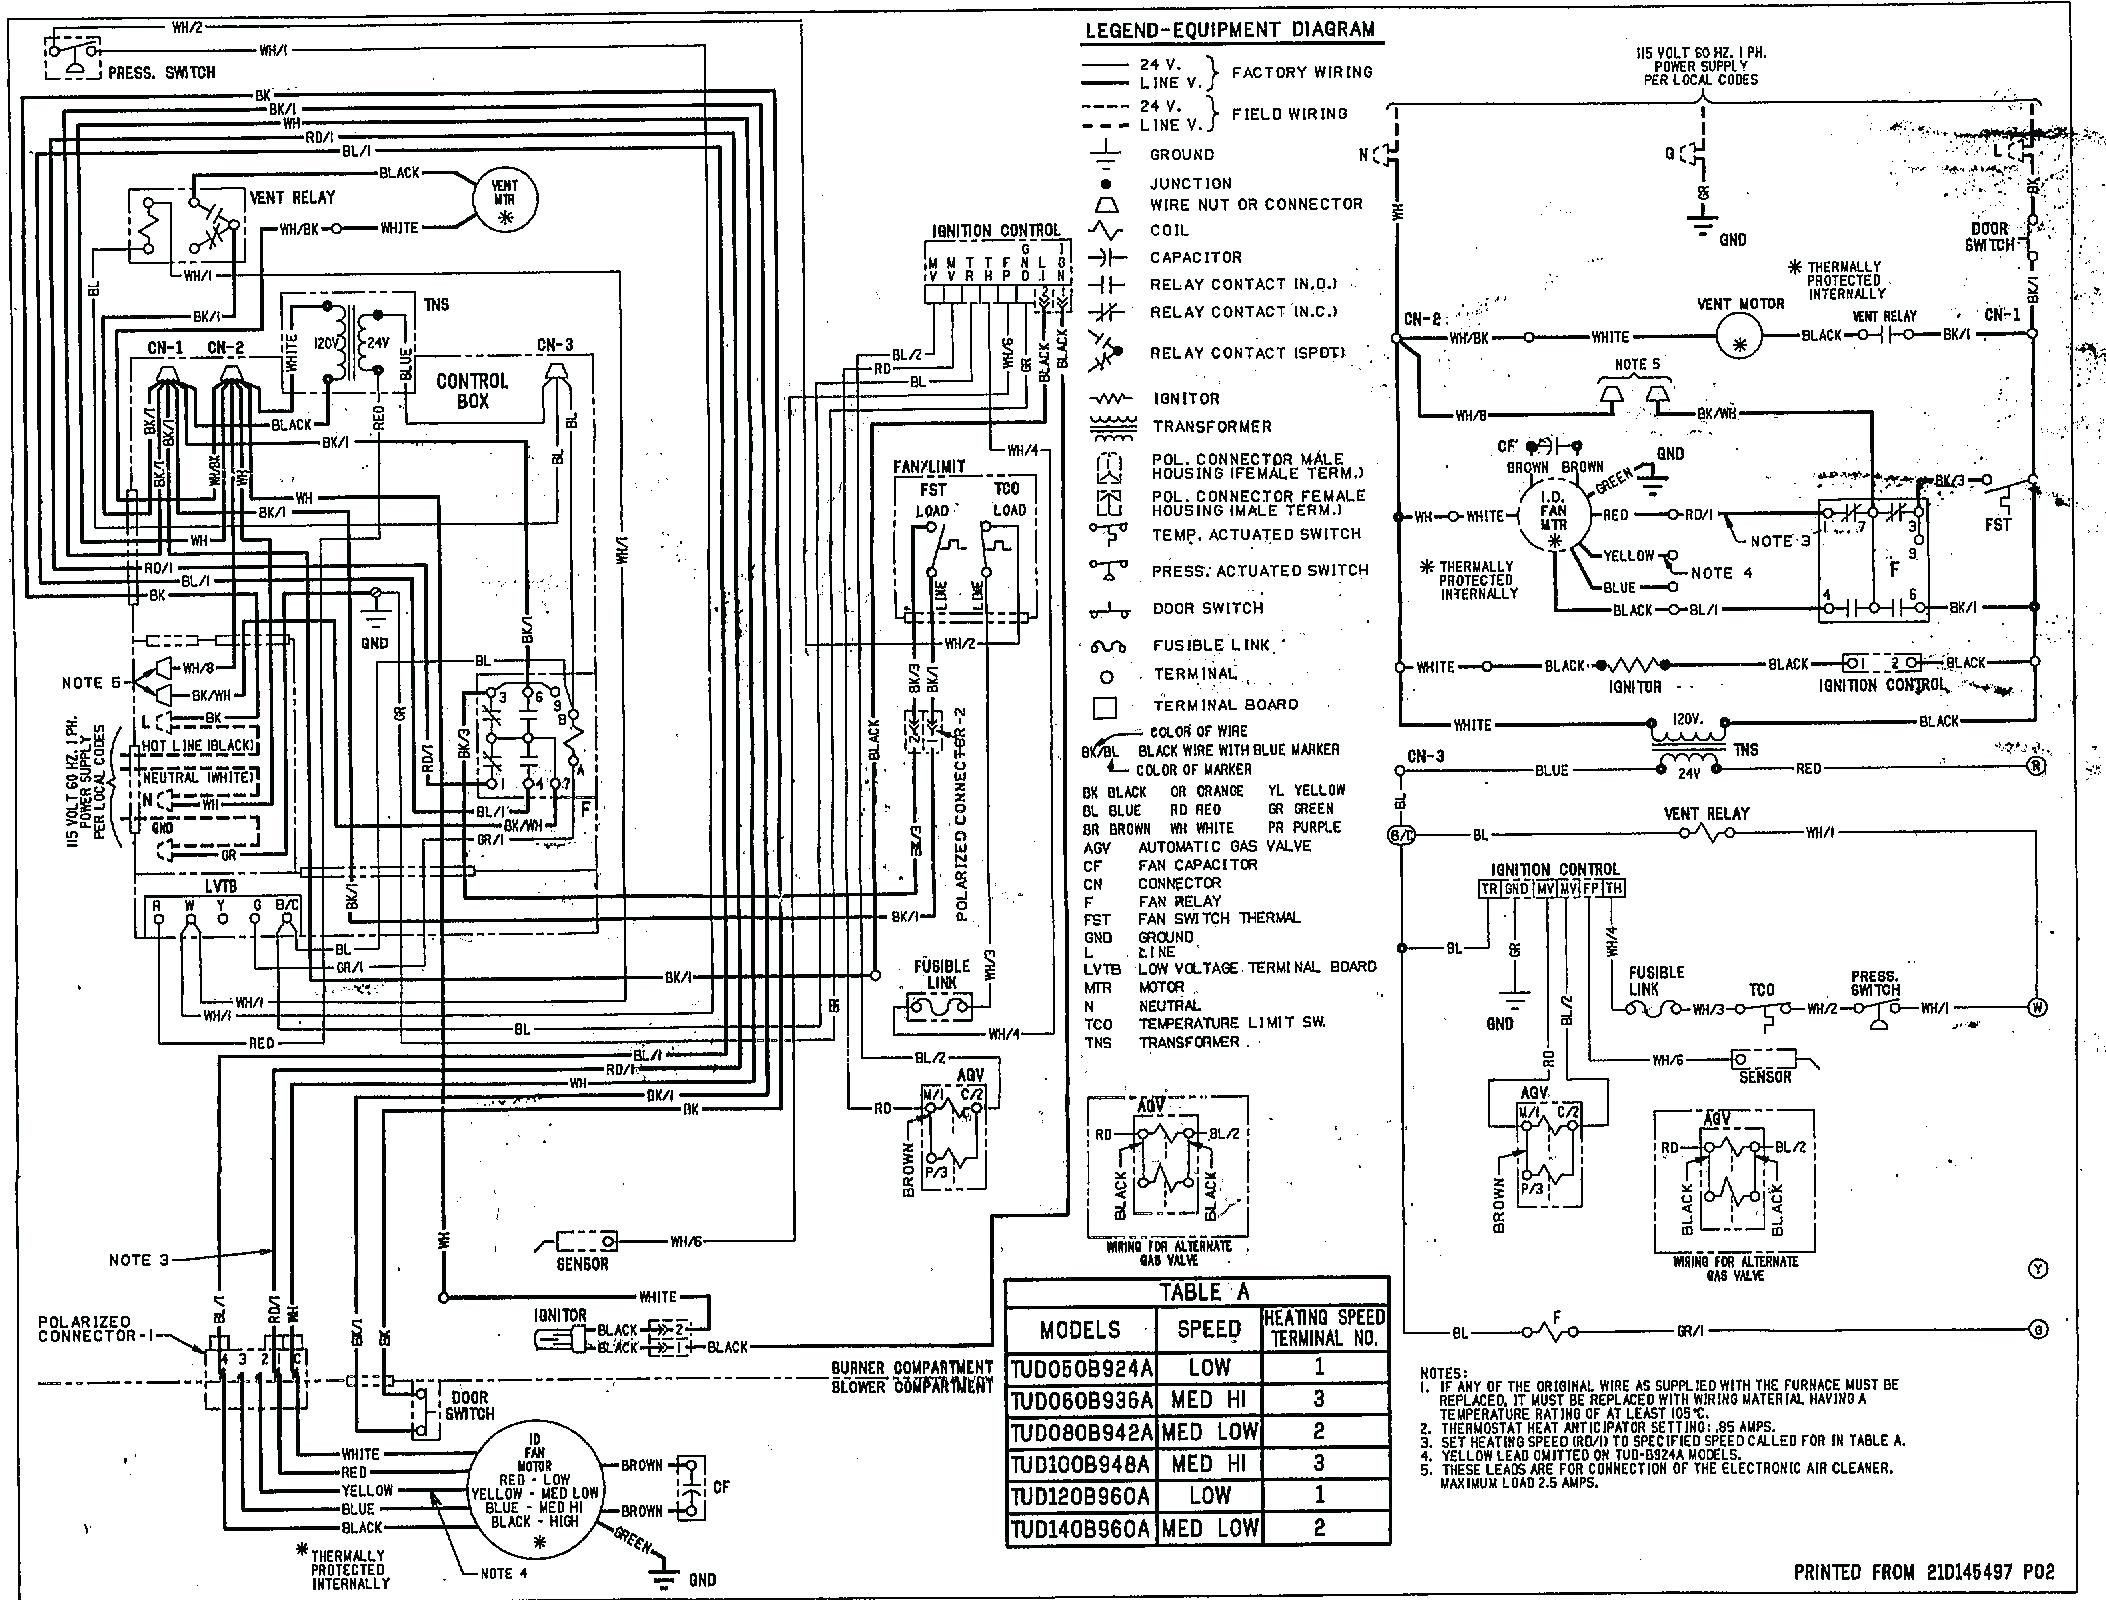 White Rodgers thermostat Wiring Diagram Fantastic White Rodgers thermostat Wiring Diagram Of White Rodgers thermostat Wiring Diagram